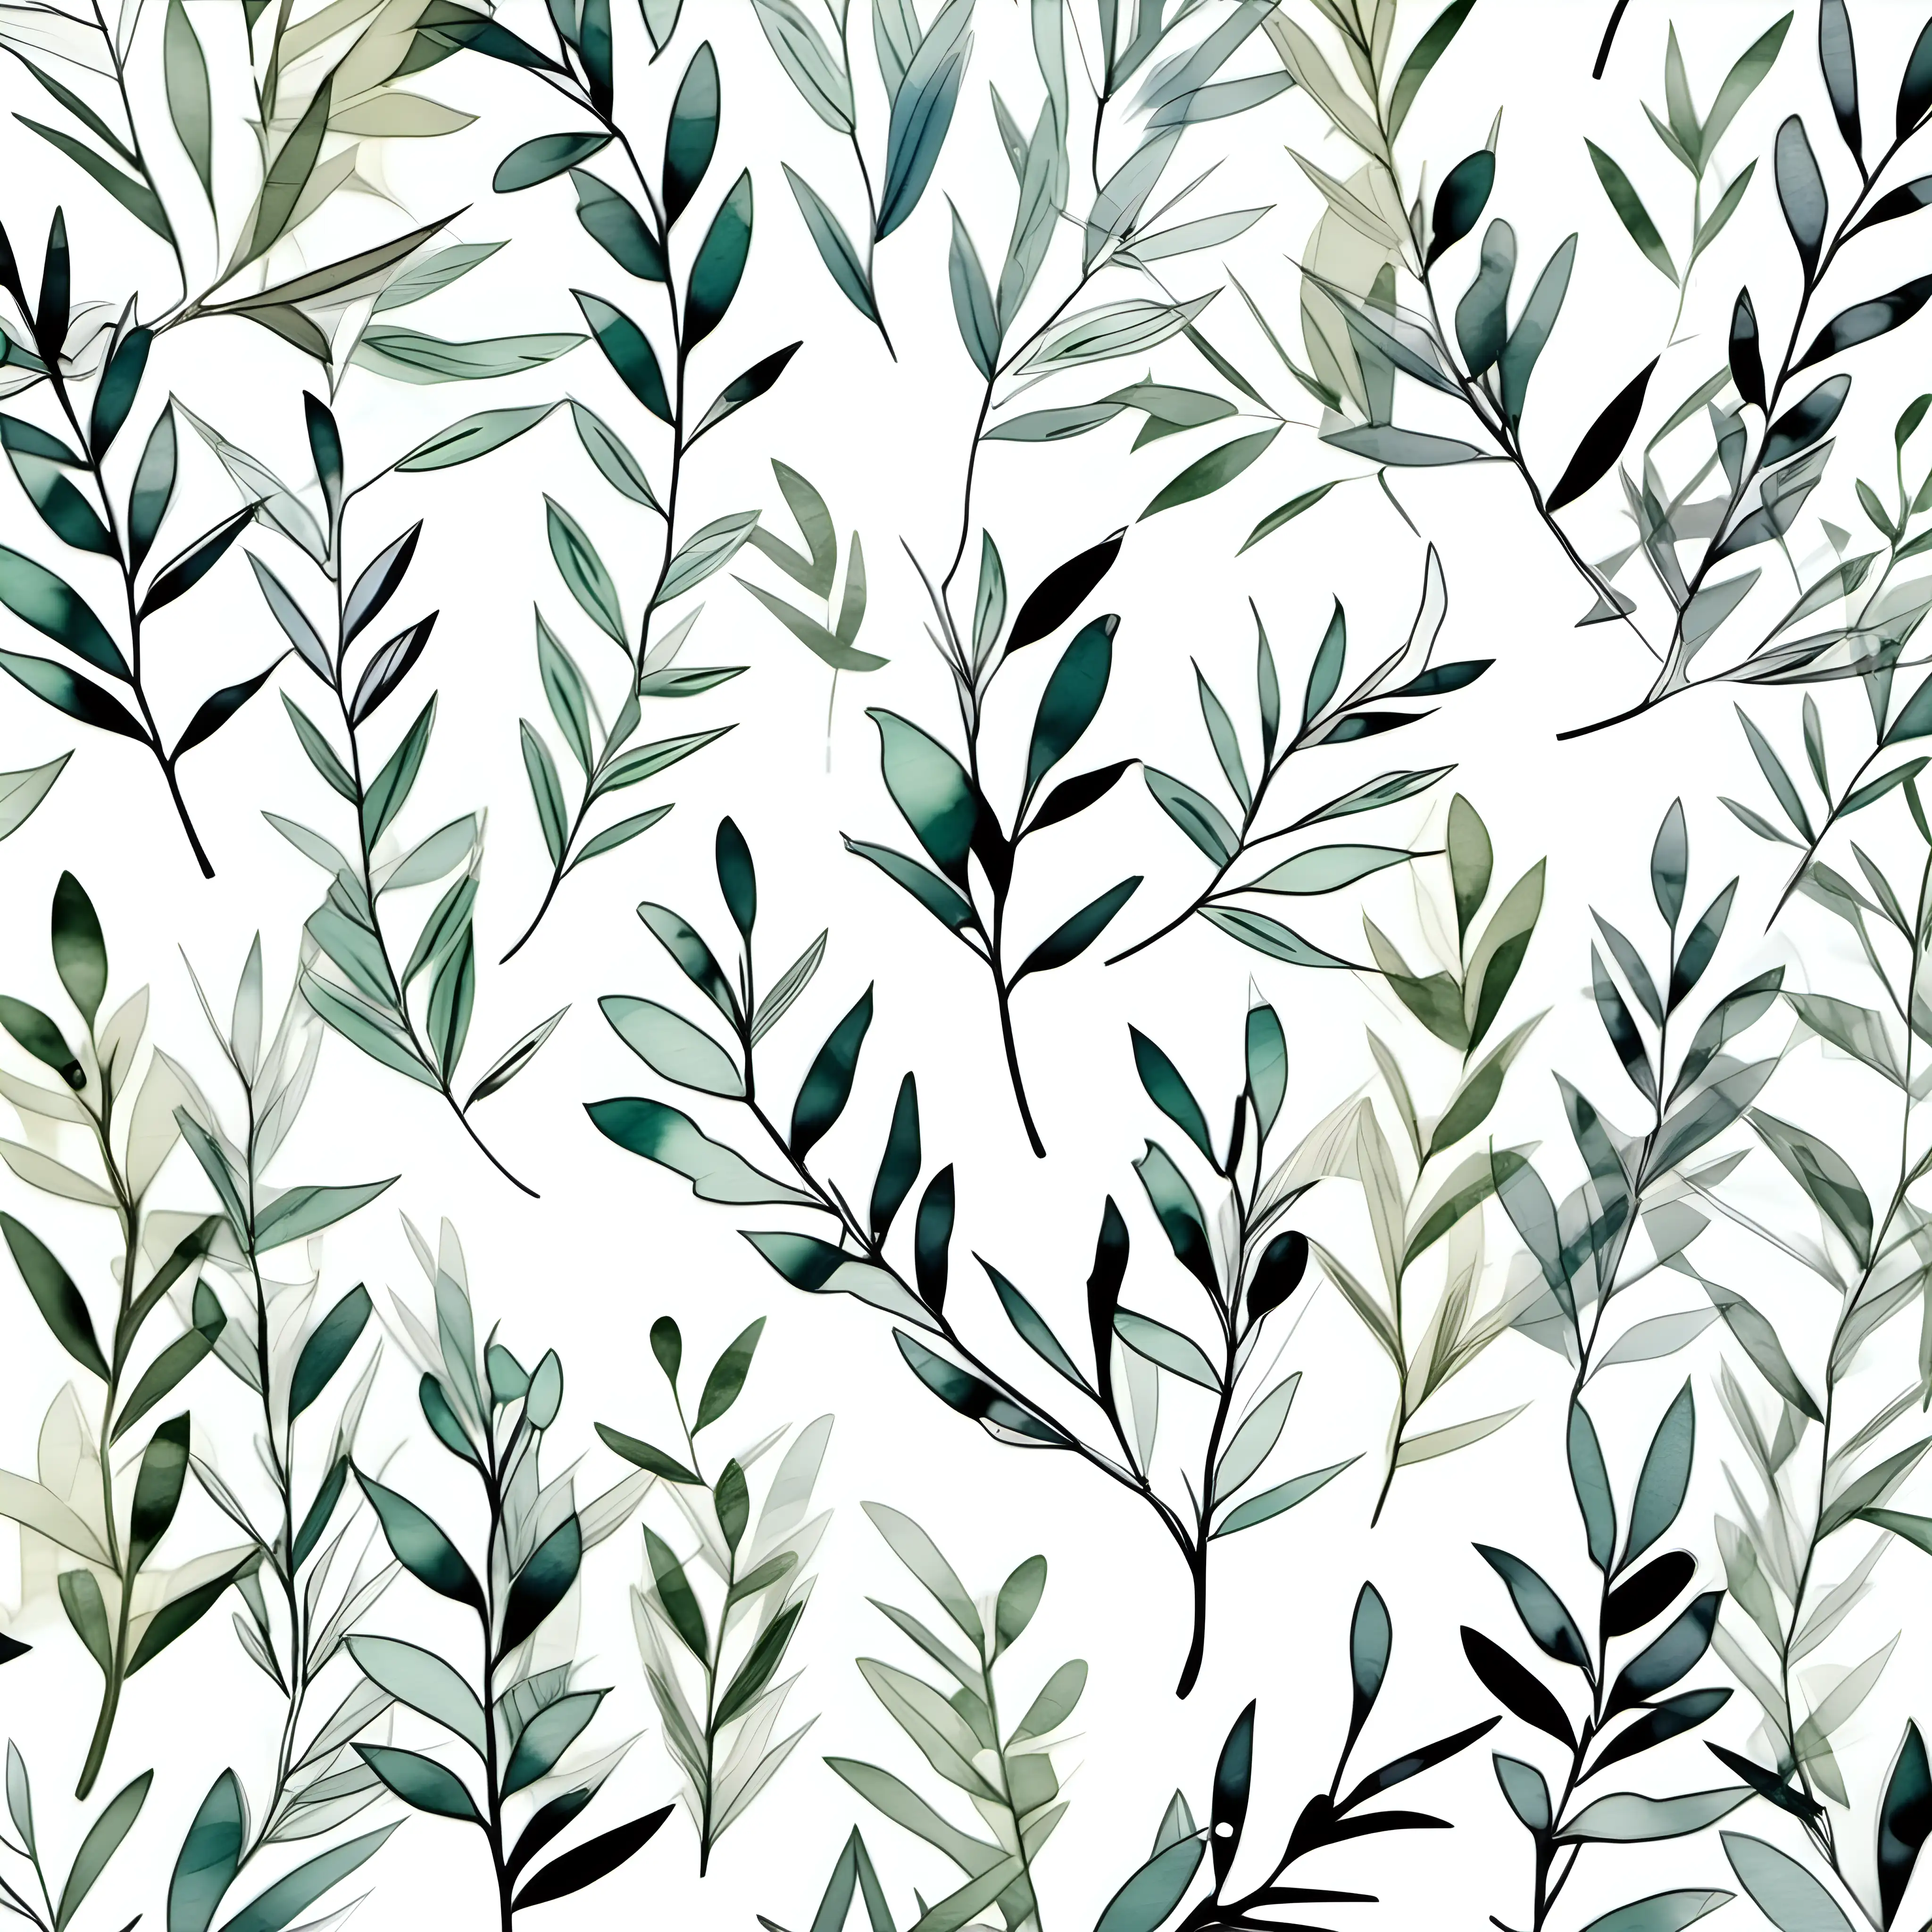 /imagine prompt pastel watercolor olive plant branches clipart on a white background andy warhol inspired--tile